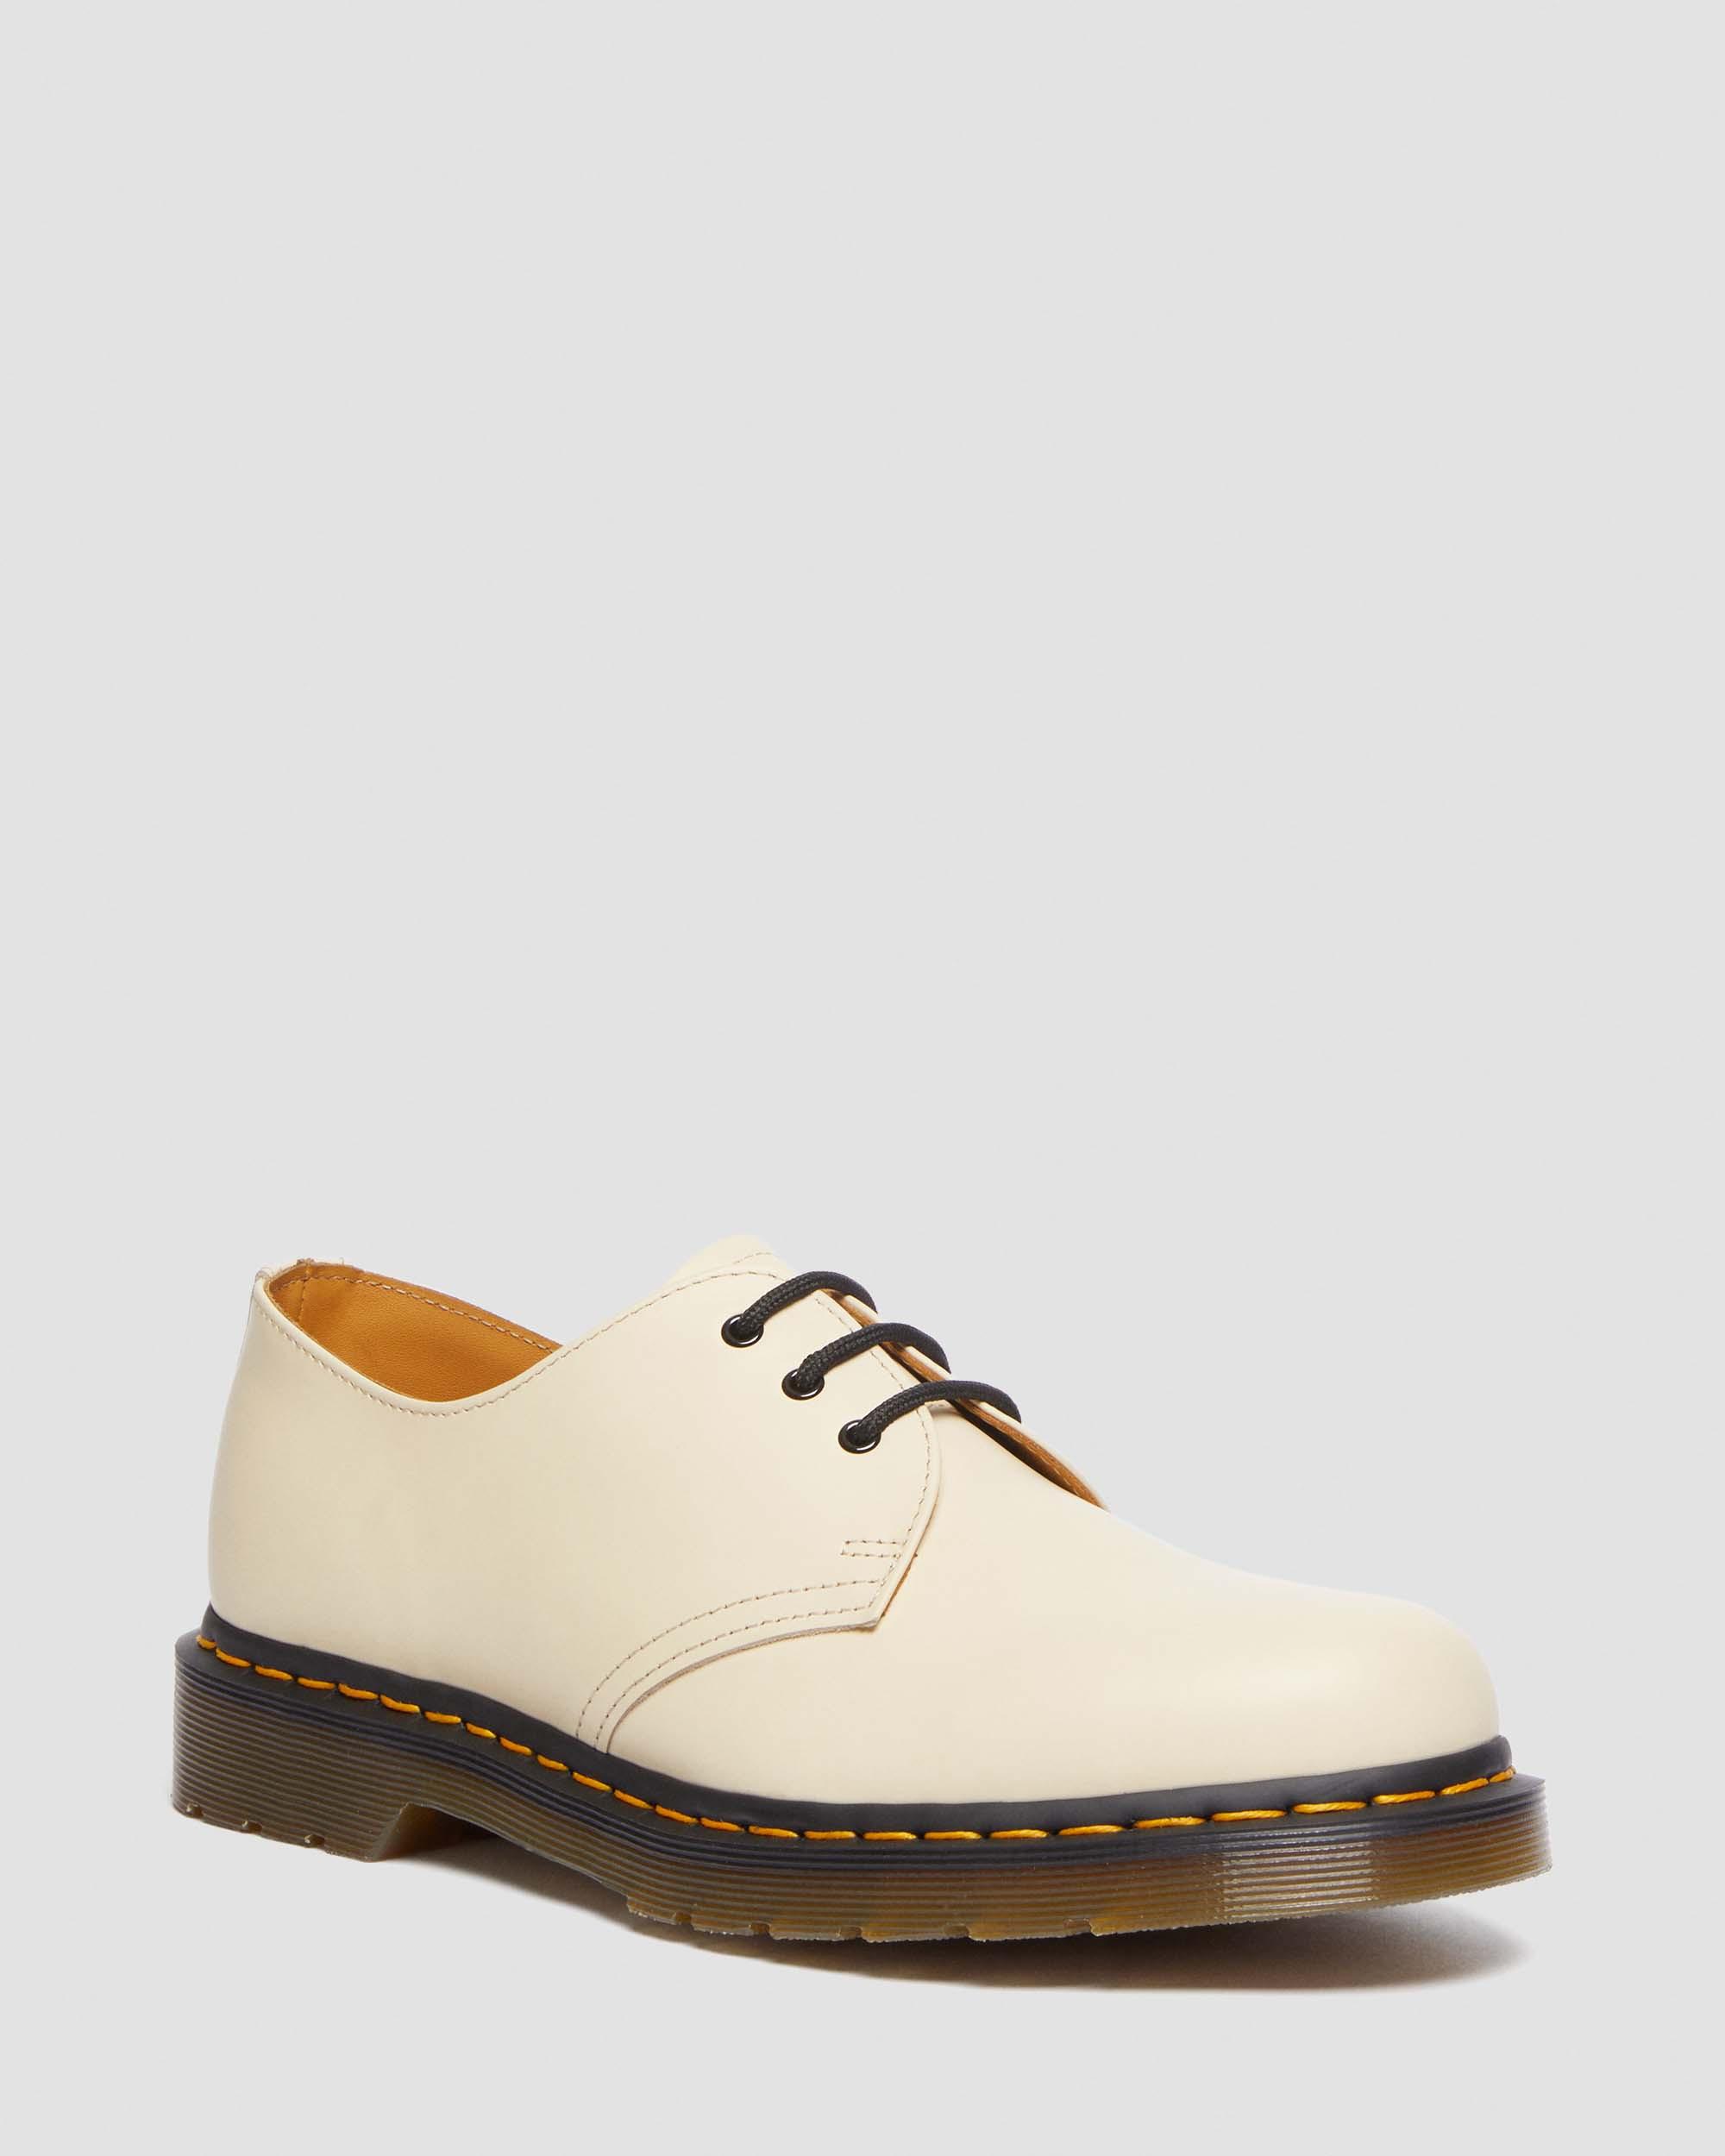 1461 Smooth Leather Oxford Shoes in Black